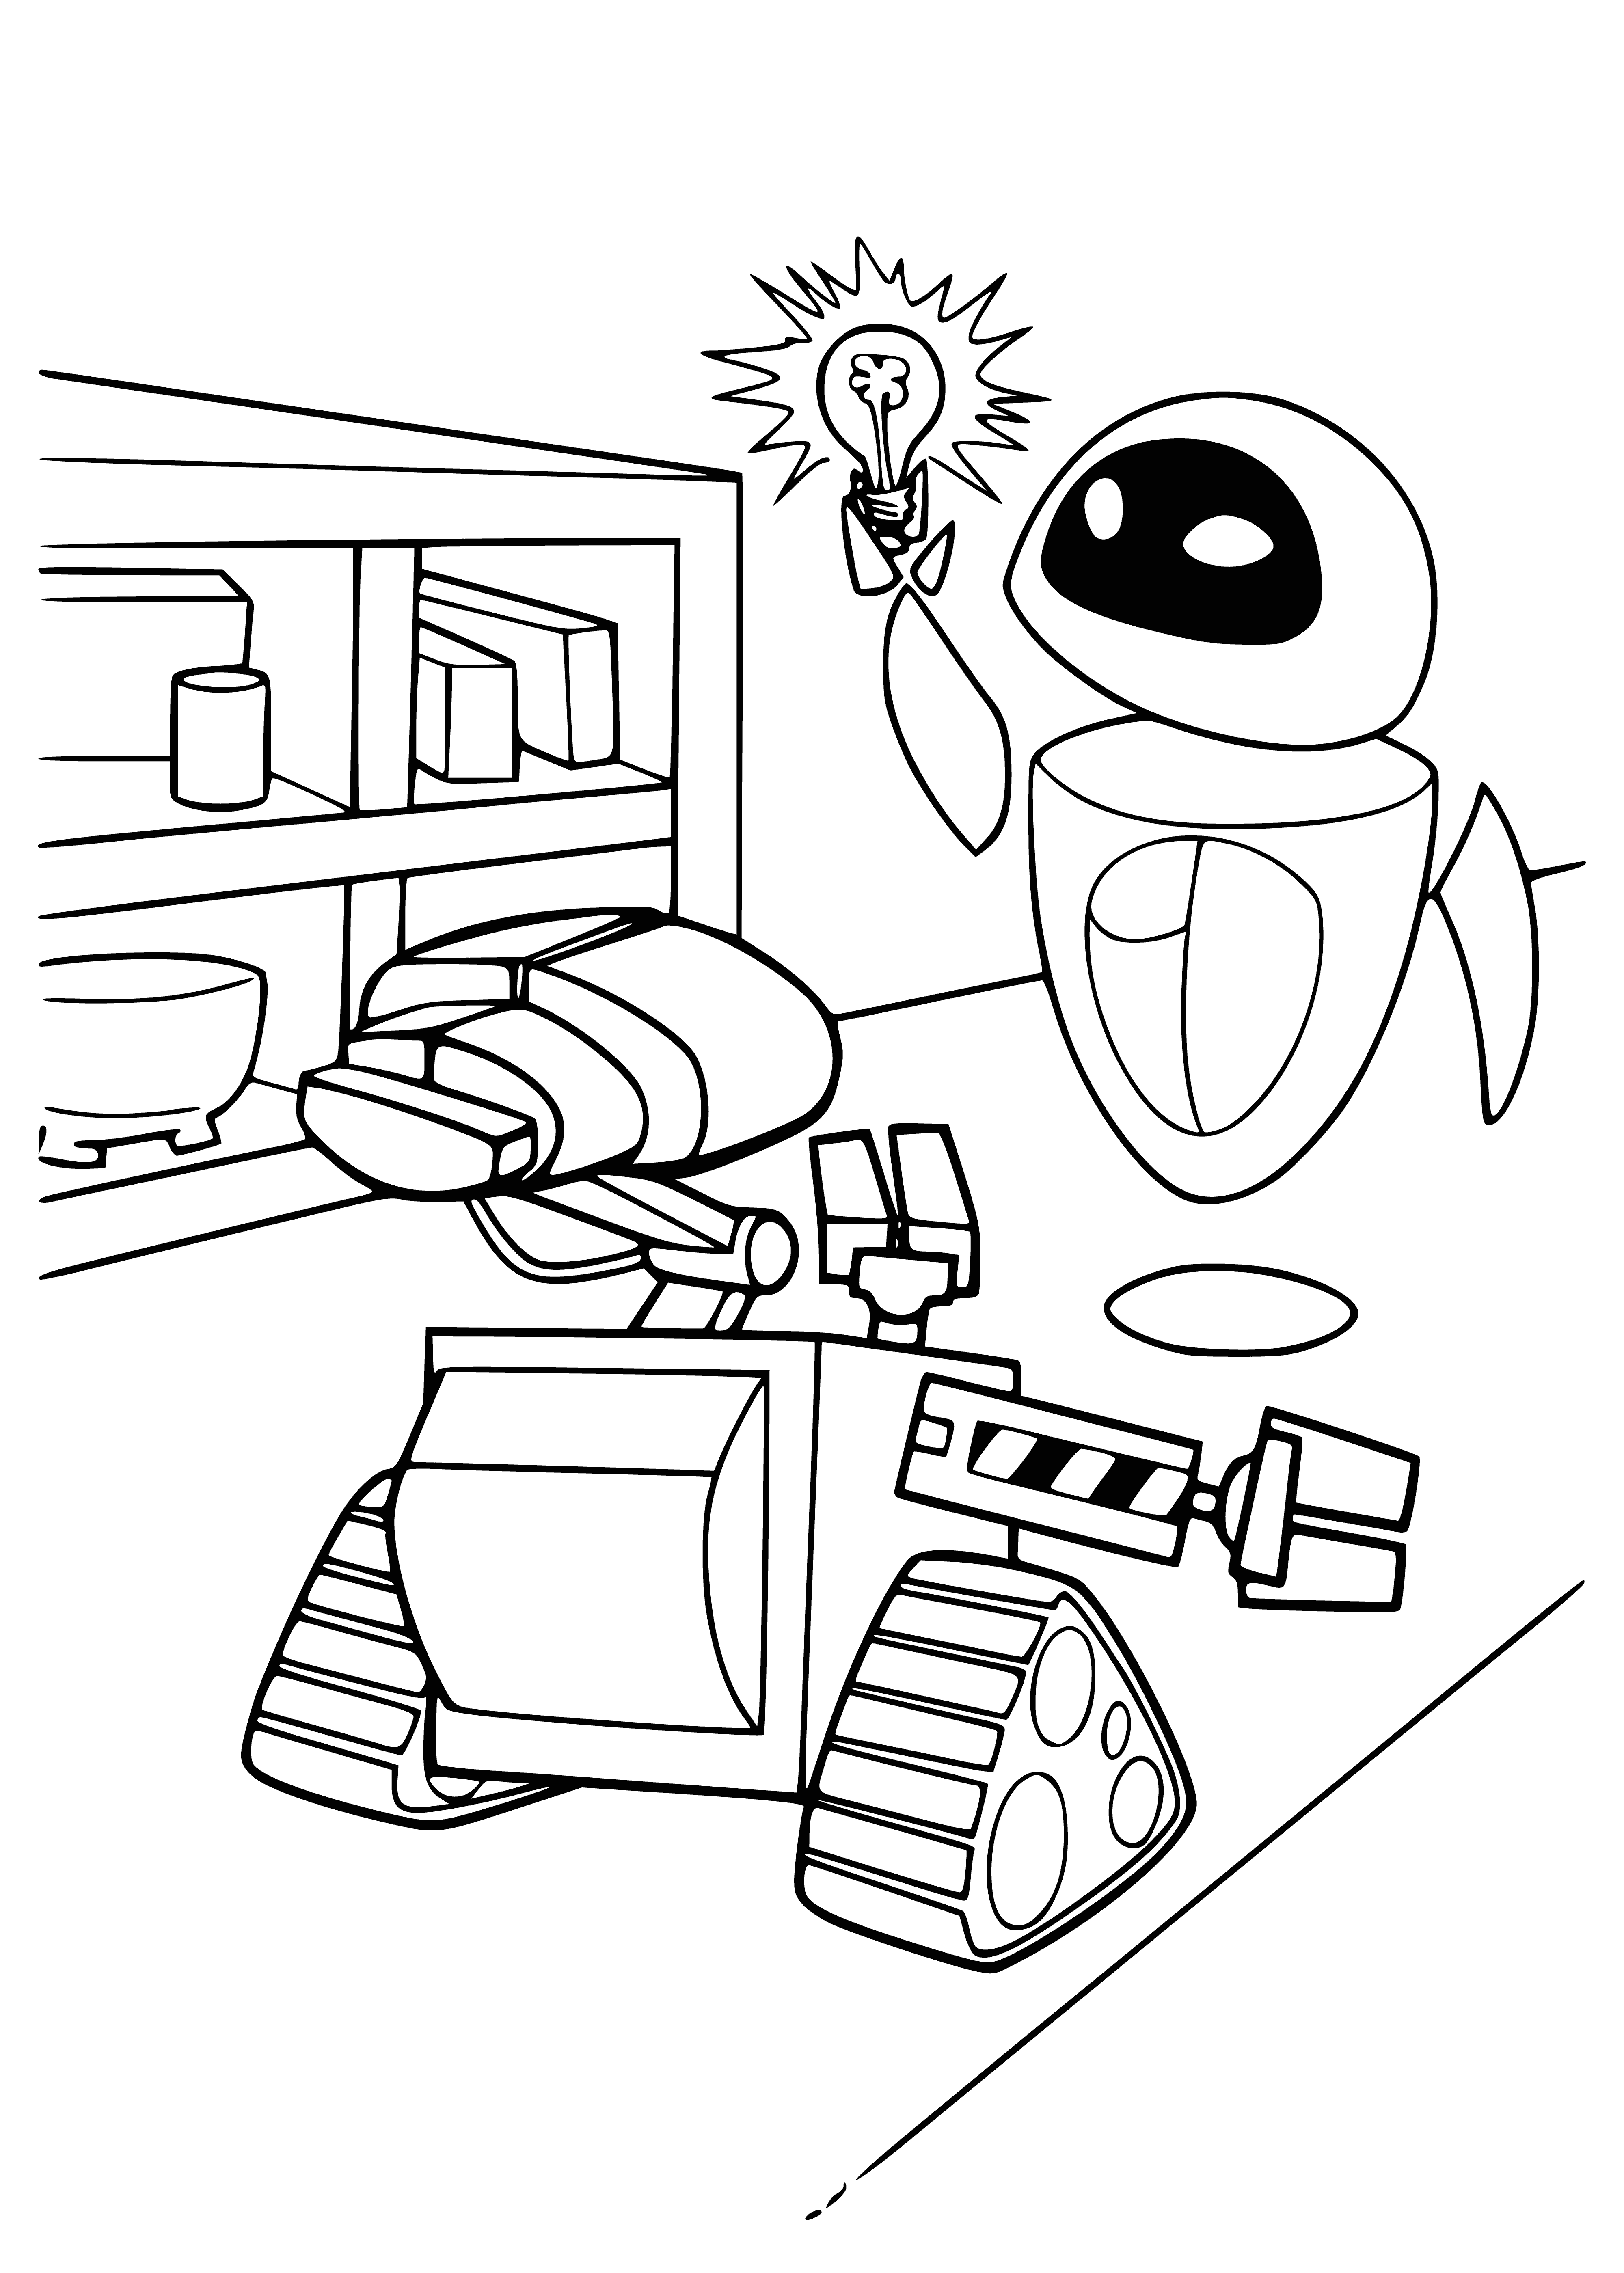 Eve visiting coloring page